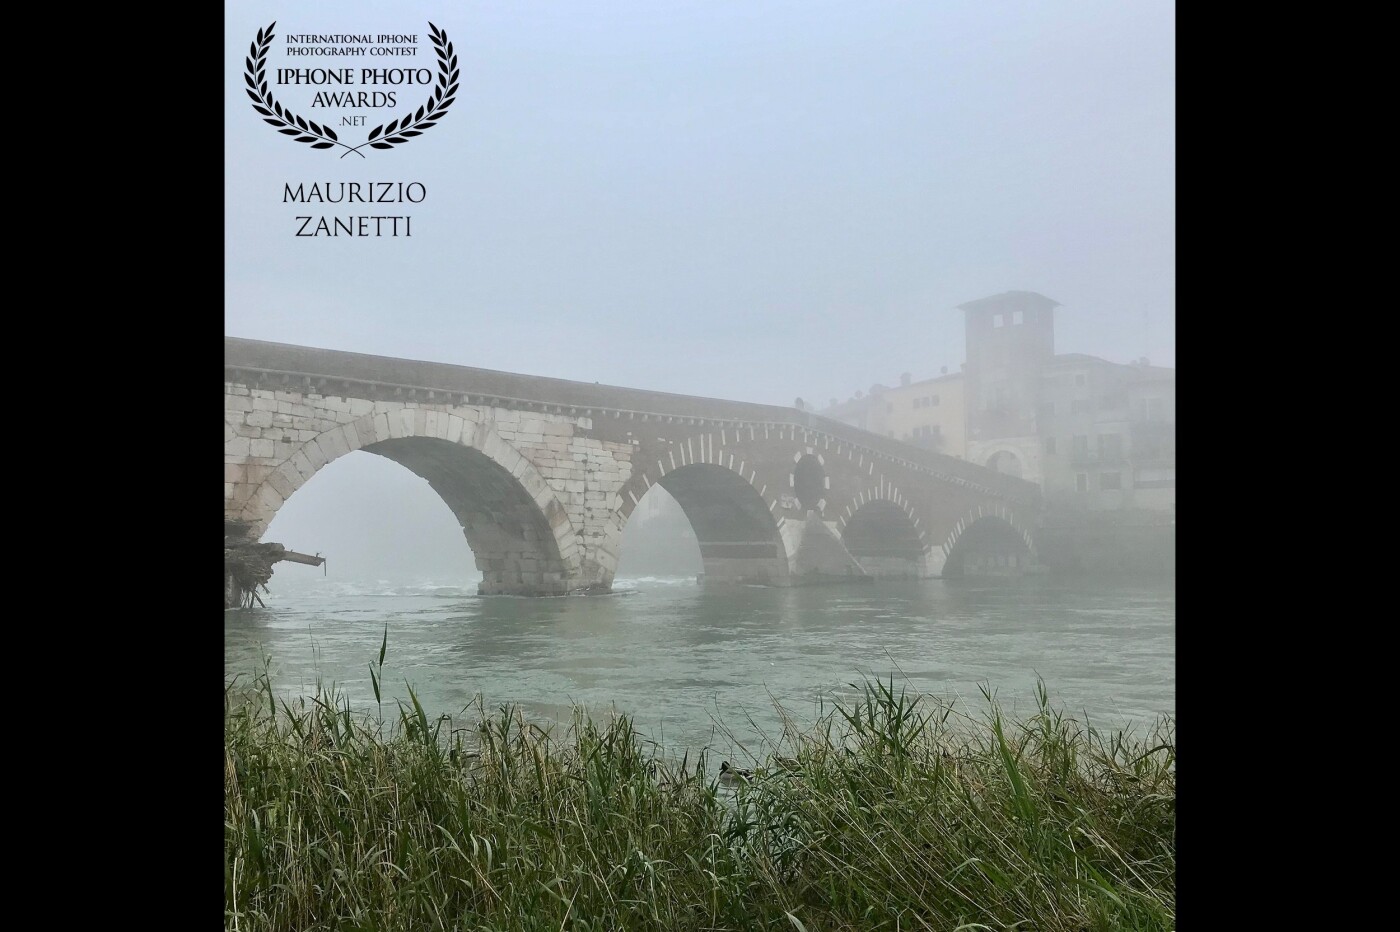 There is nothing to do: you can no longer see the mists of the past, the ones that even in the city center prevented you from seeing a few meters away. Today, it will be due to the rise in temperatures, more mists than fogs in the center. However, they give magic to known landscapes. As in the Roman bridge Ponte Pietra.